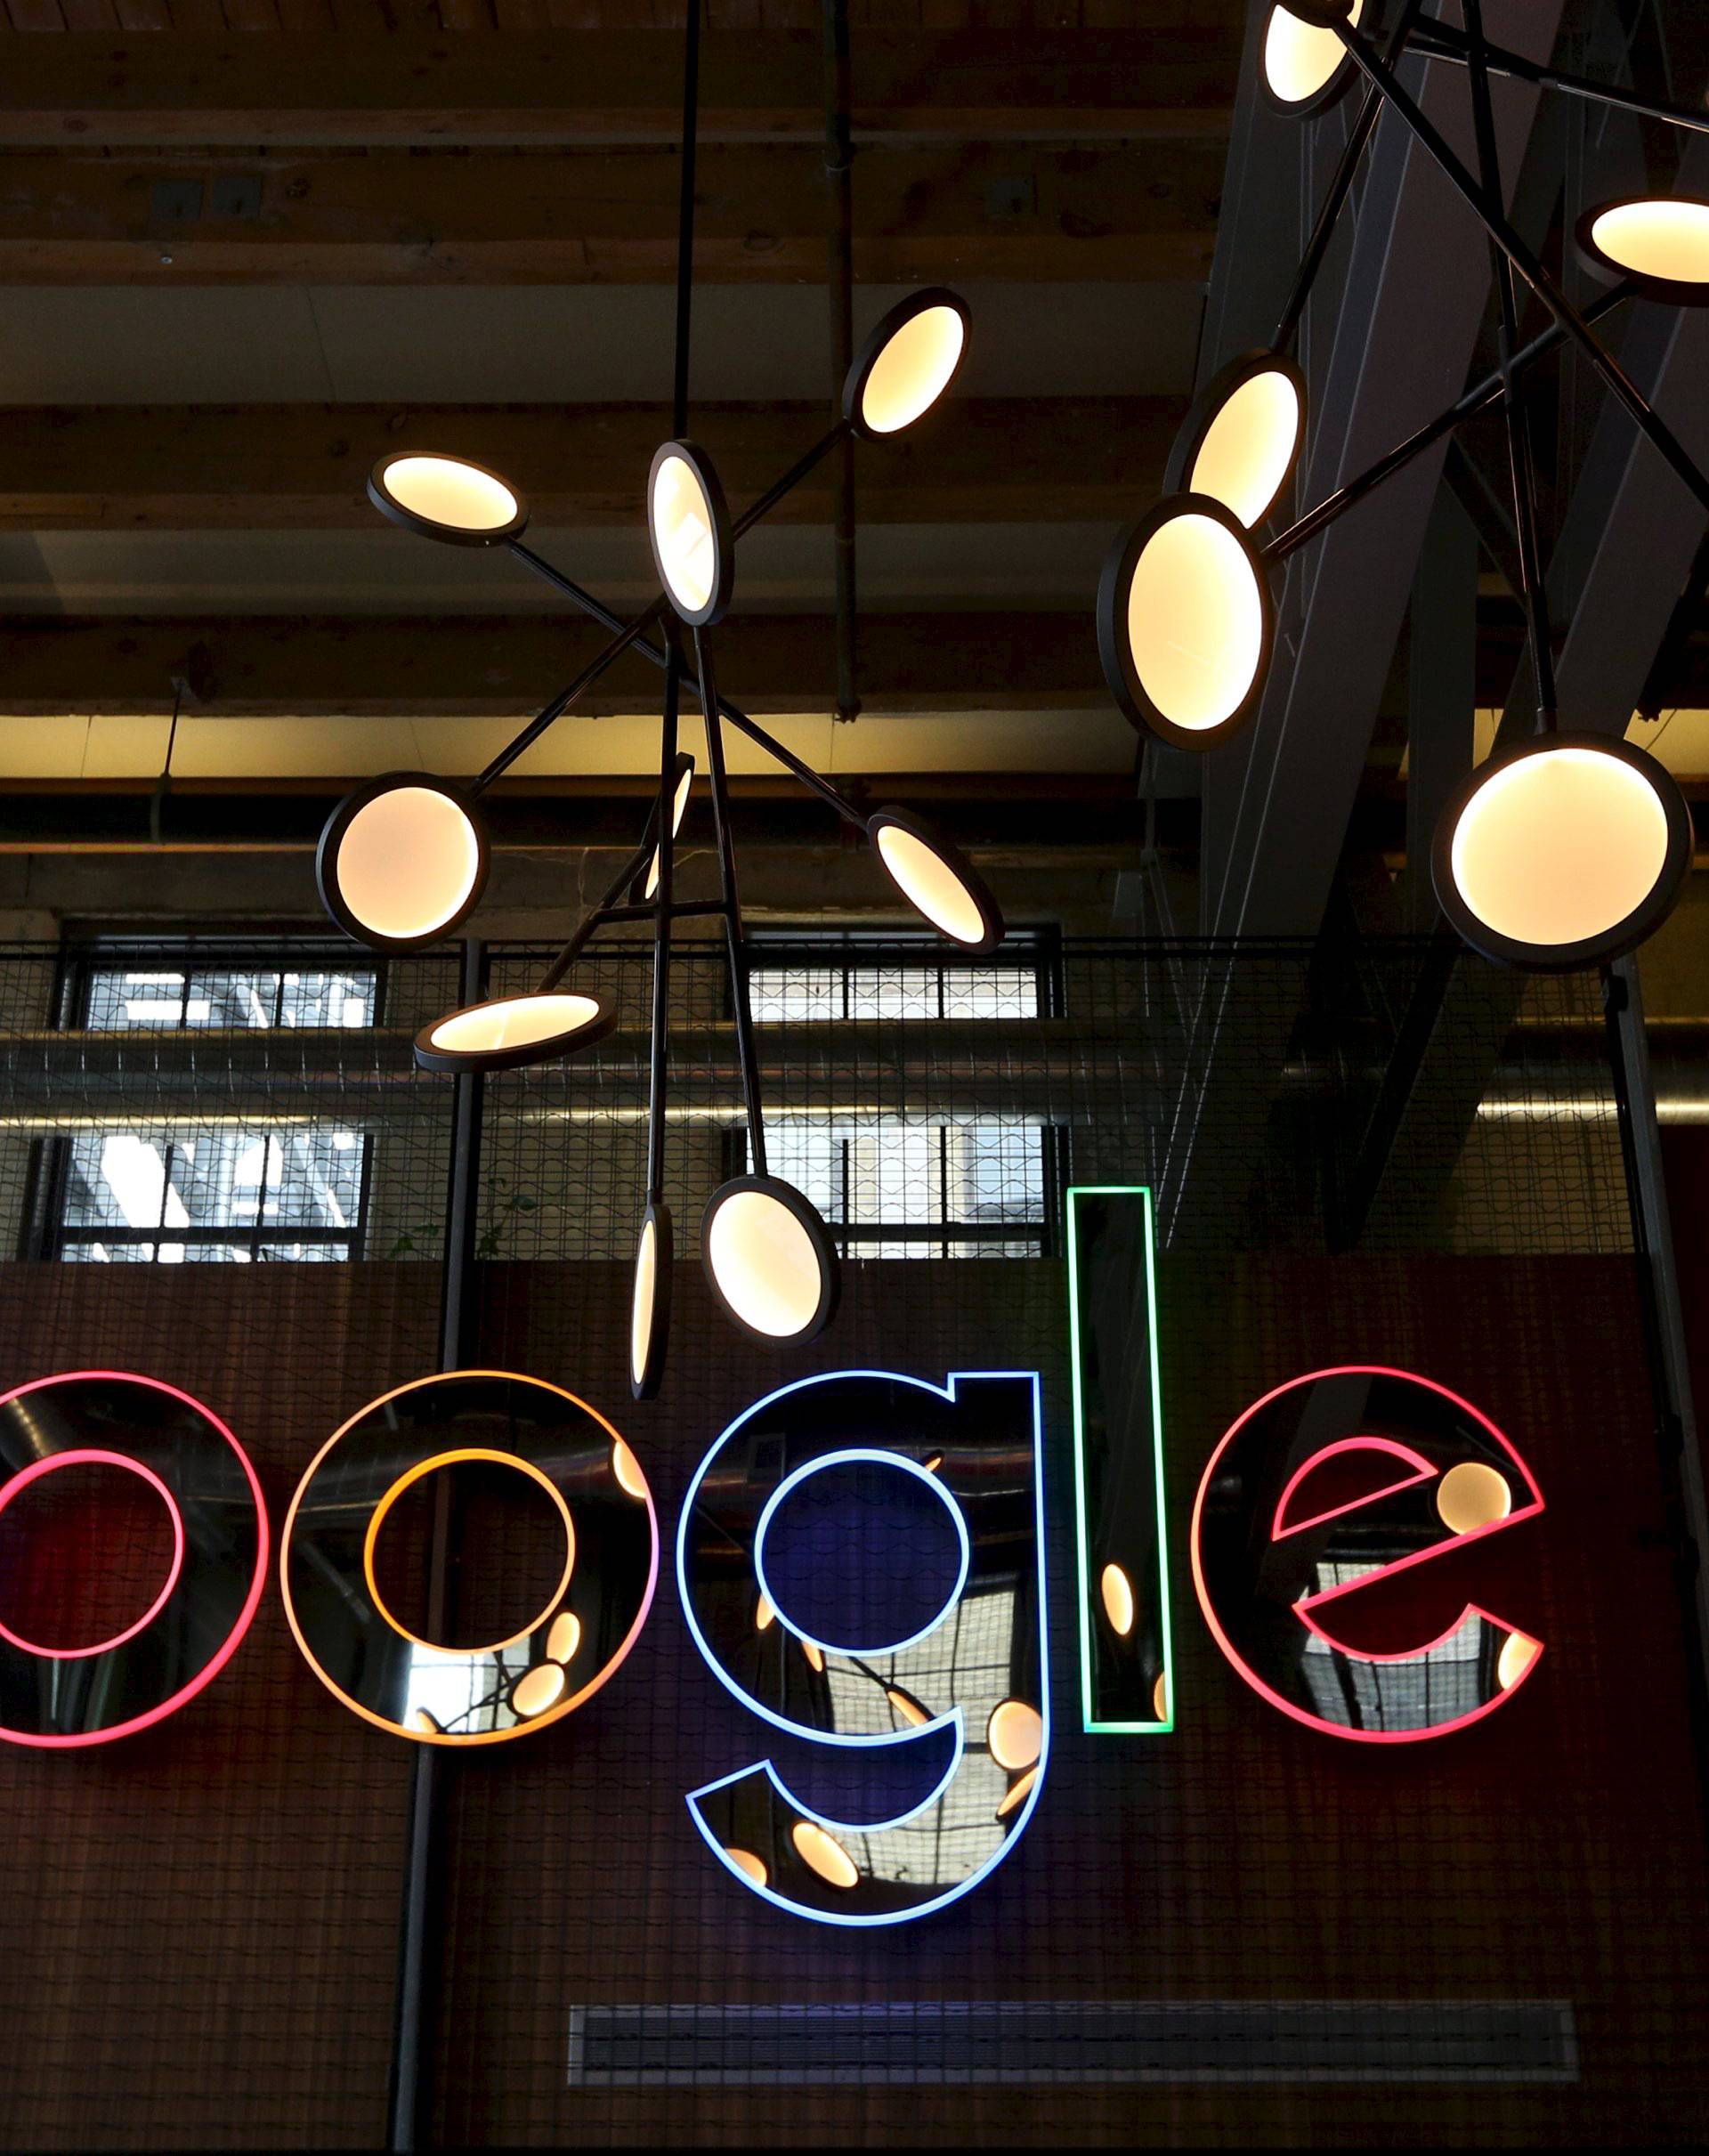 A neon Google sign is seen in the foyer of Google's new Canadian engineering headquarters in Kitchener-Waterloo